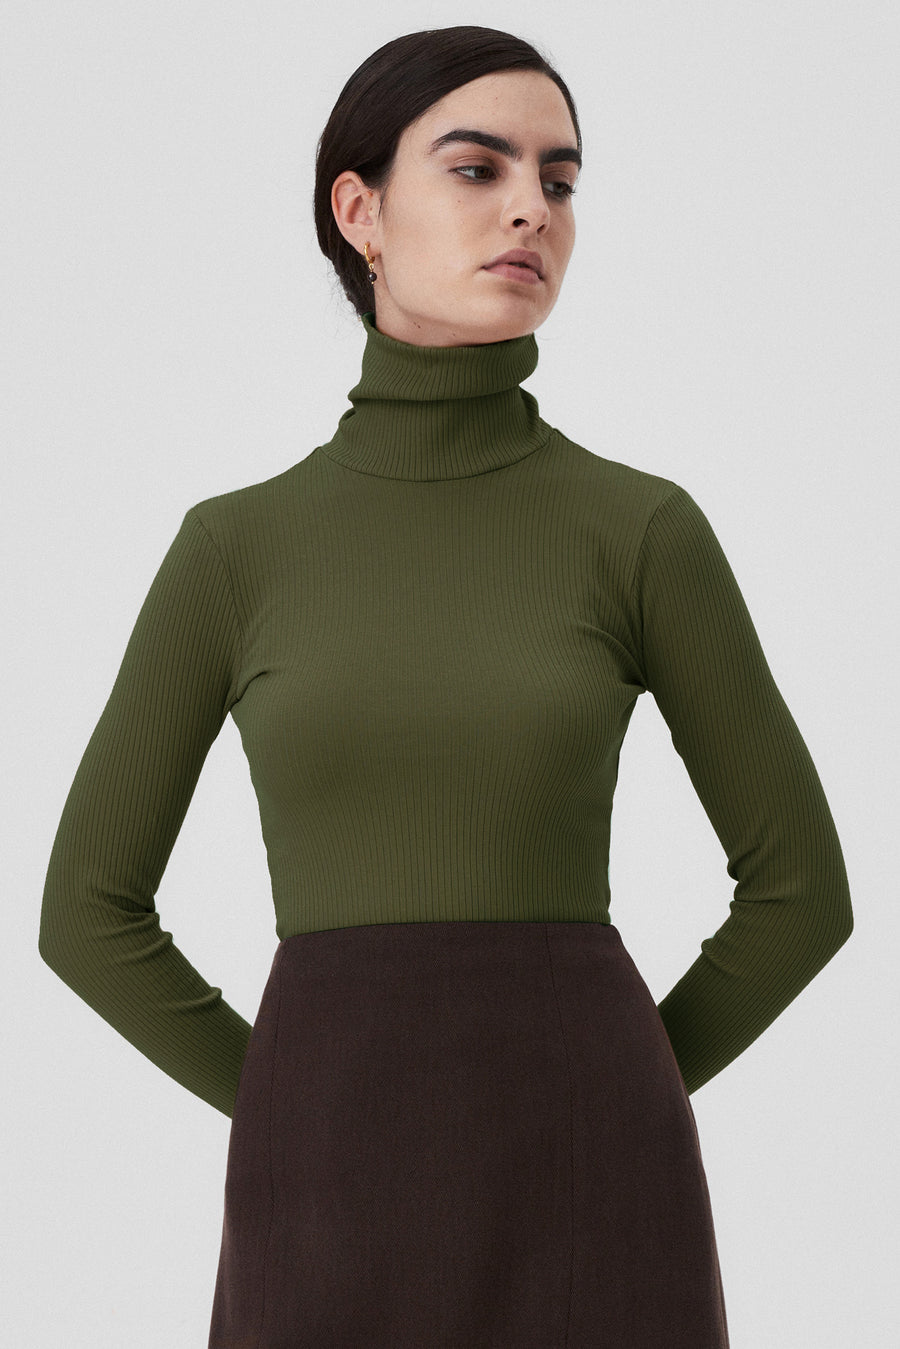 Turtleneck in organic cotton / 15 / 02 / olive garden *tencel-skirt-07-02-dark-chocolate* ?The model is 172cm tall and wears size XS? |